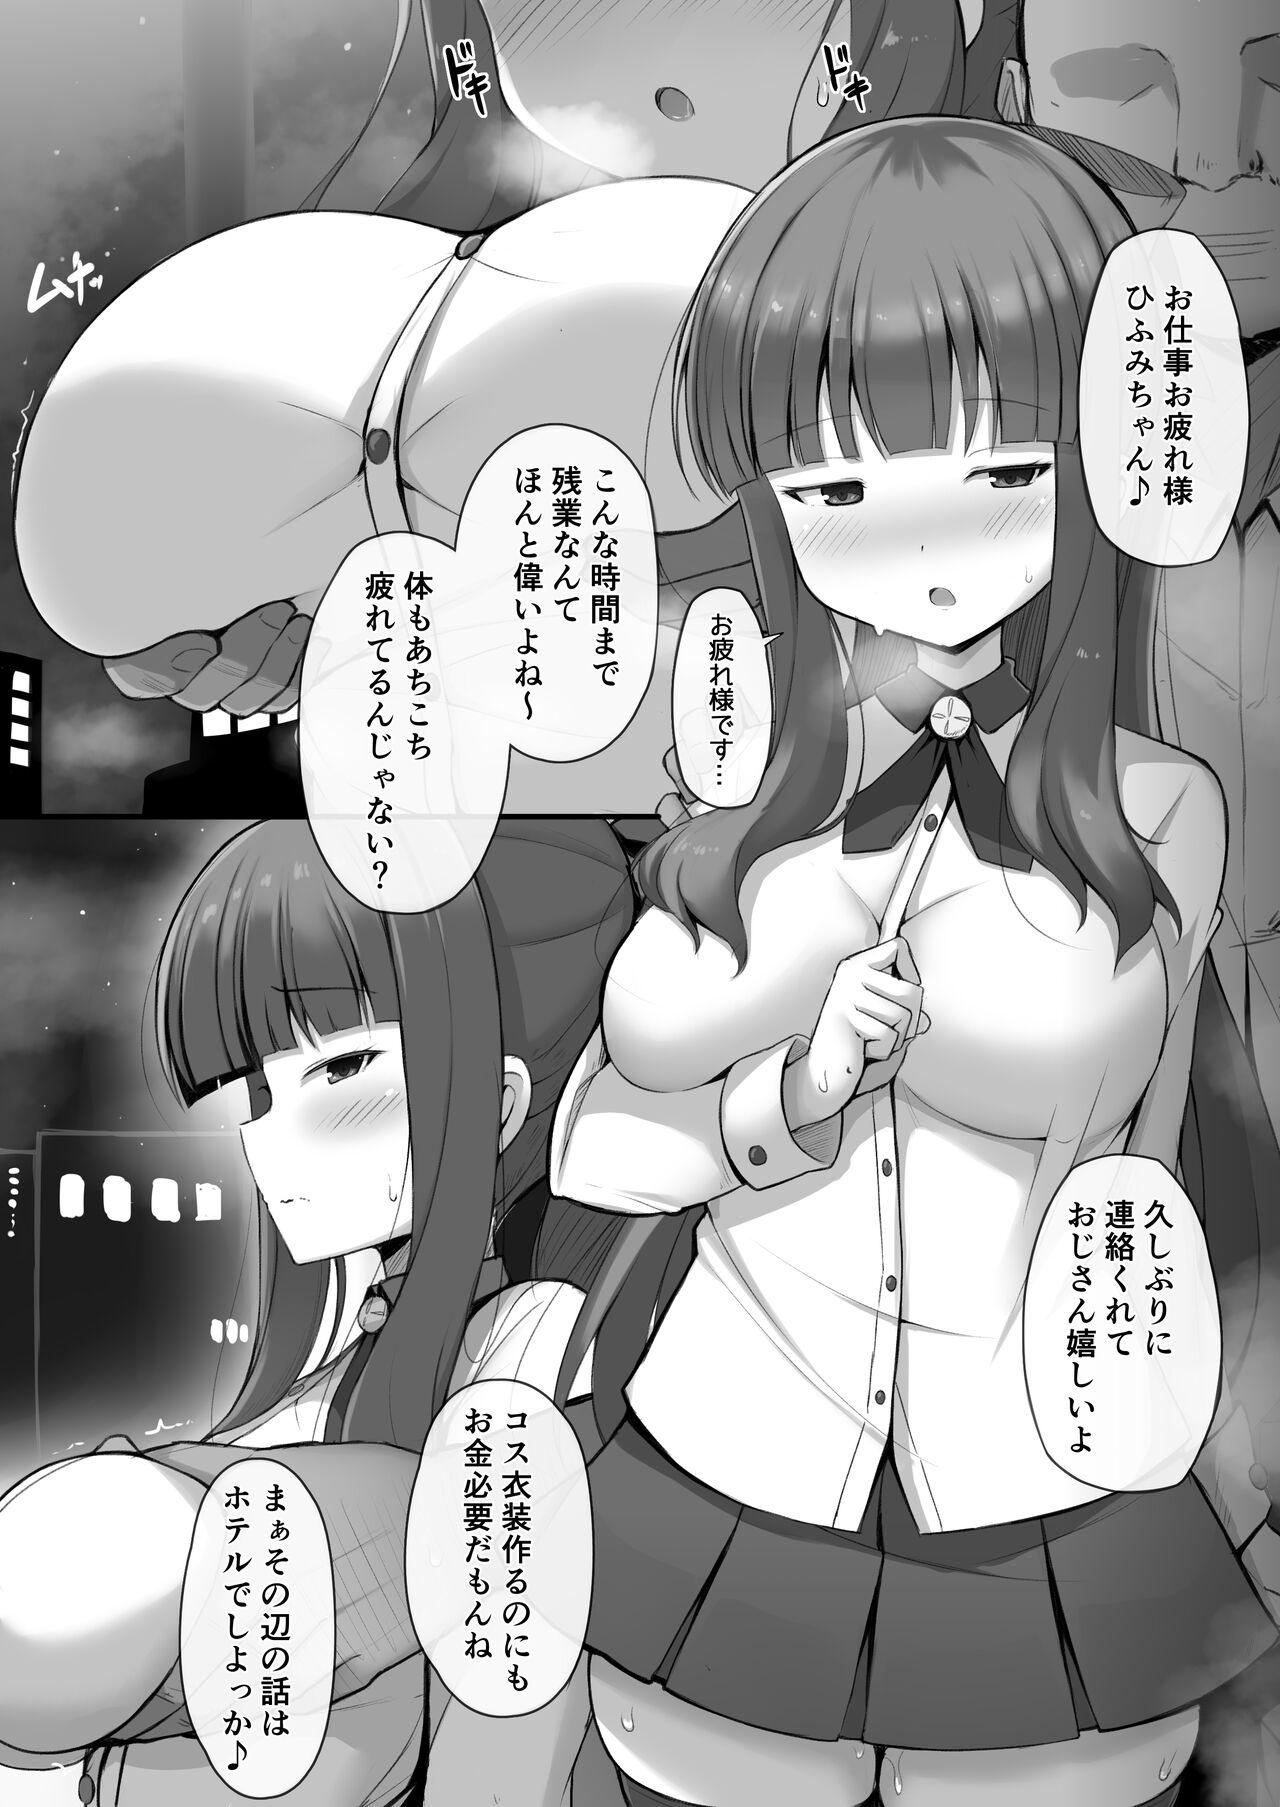 The ひふみんパパ活漫画 - New game Solo Female - Picture 1